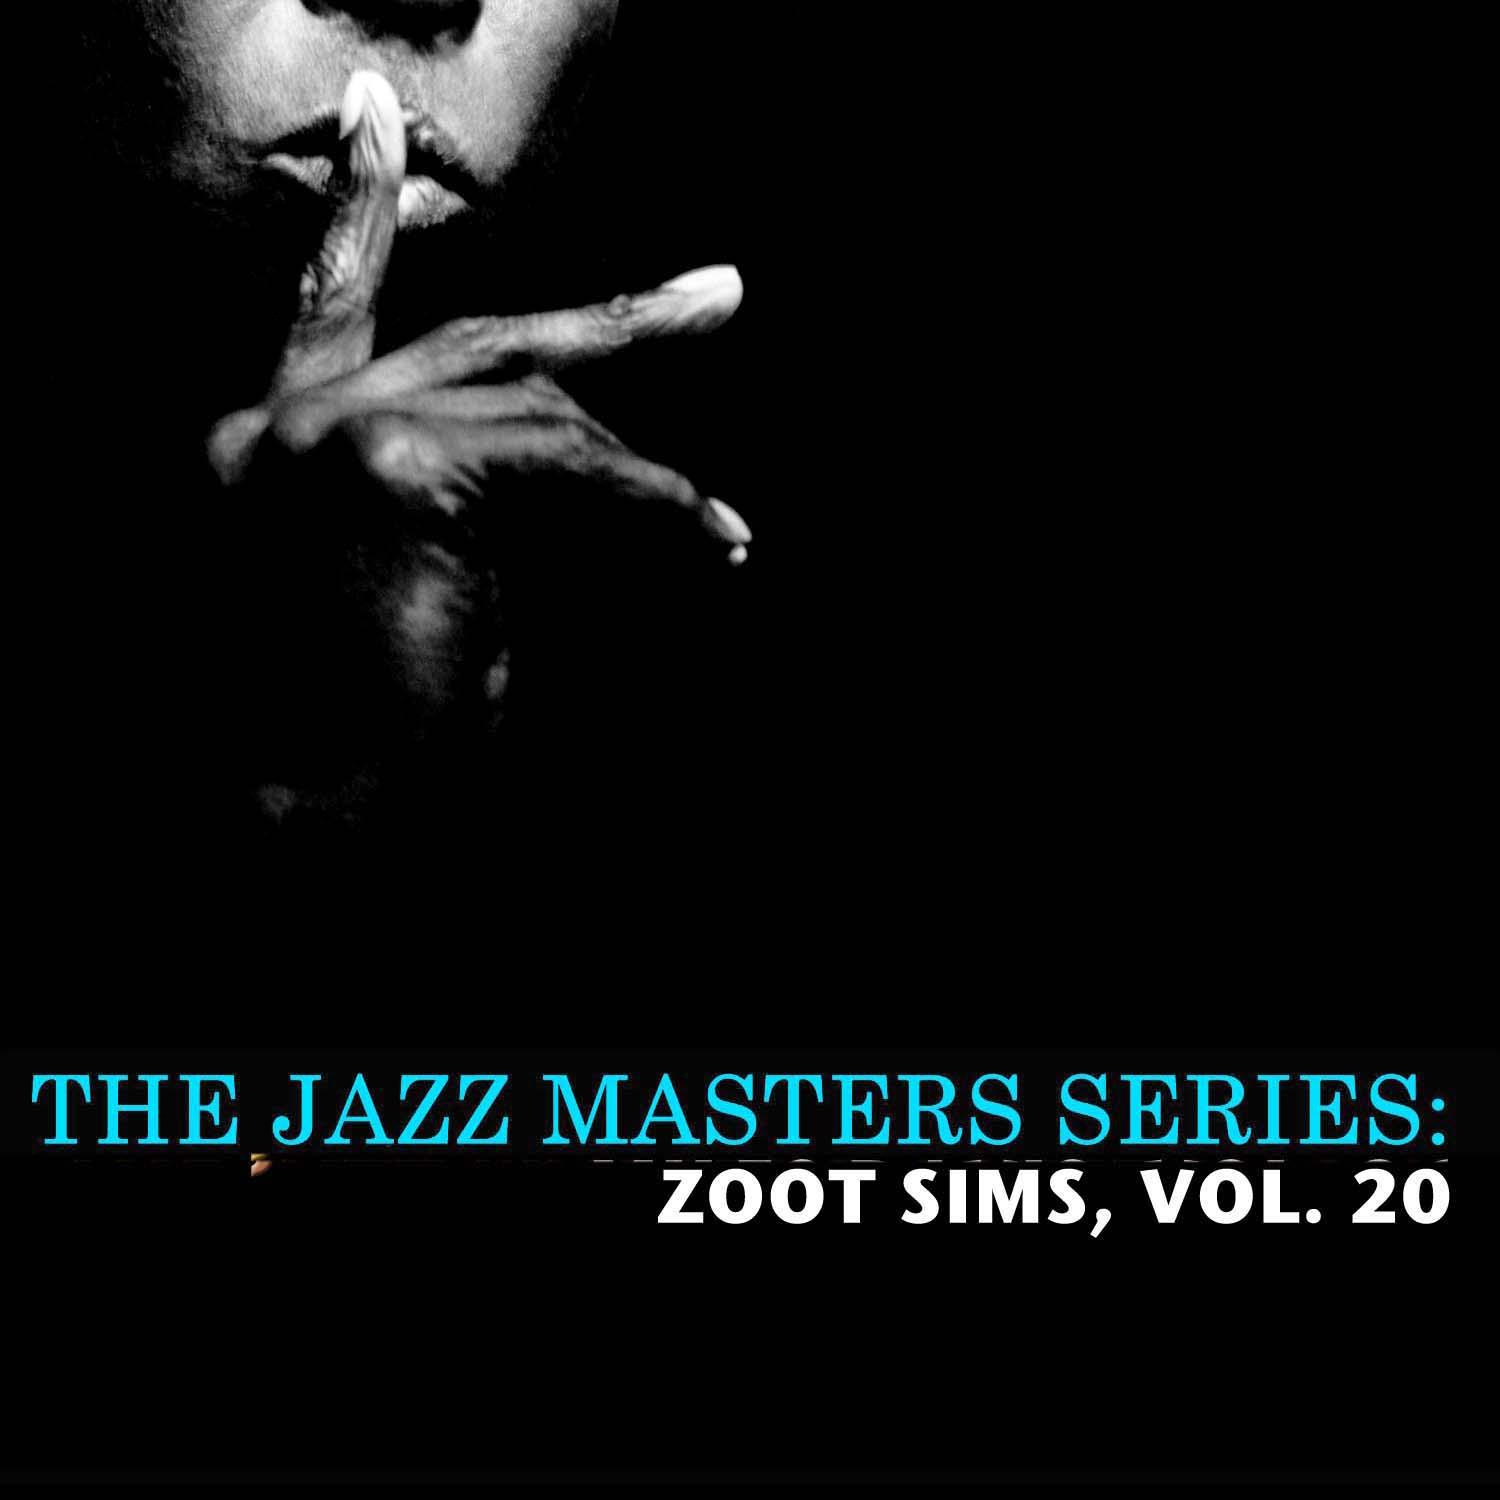 The Jazz Masters Series: Zoot Sims, Vol. 20